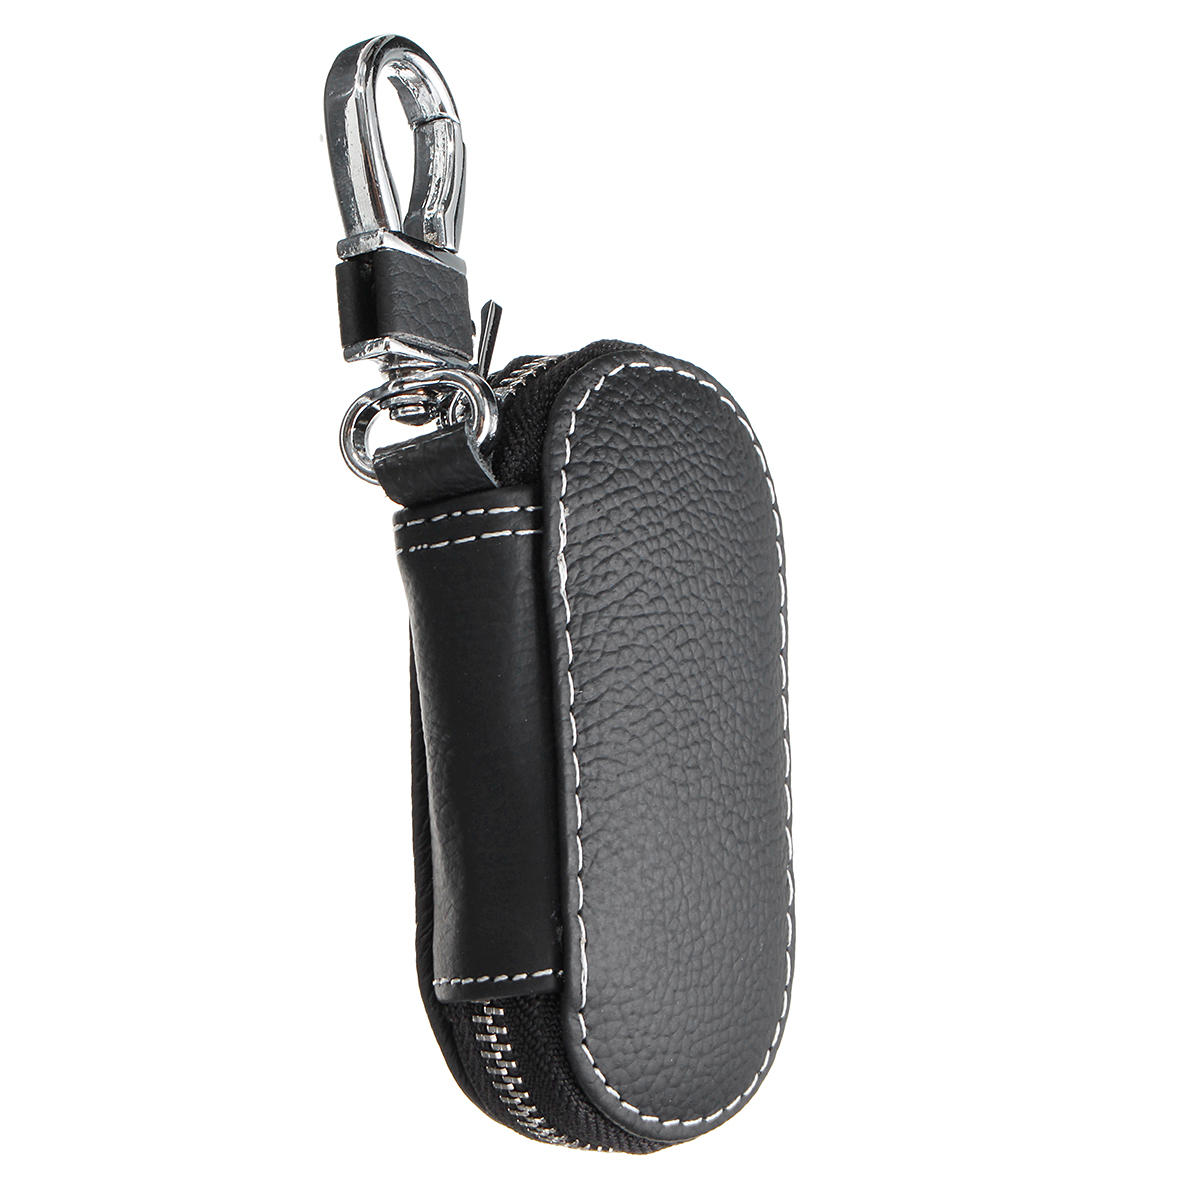 universal car pu leather smart remote key holder bags cases black ...